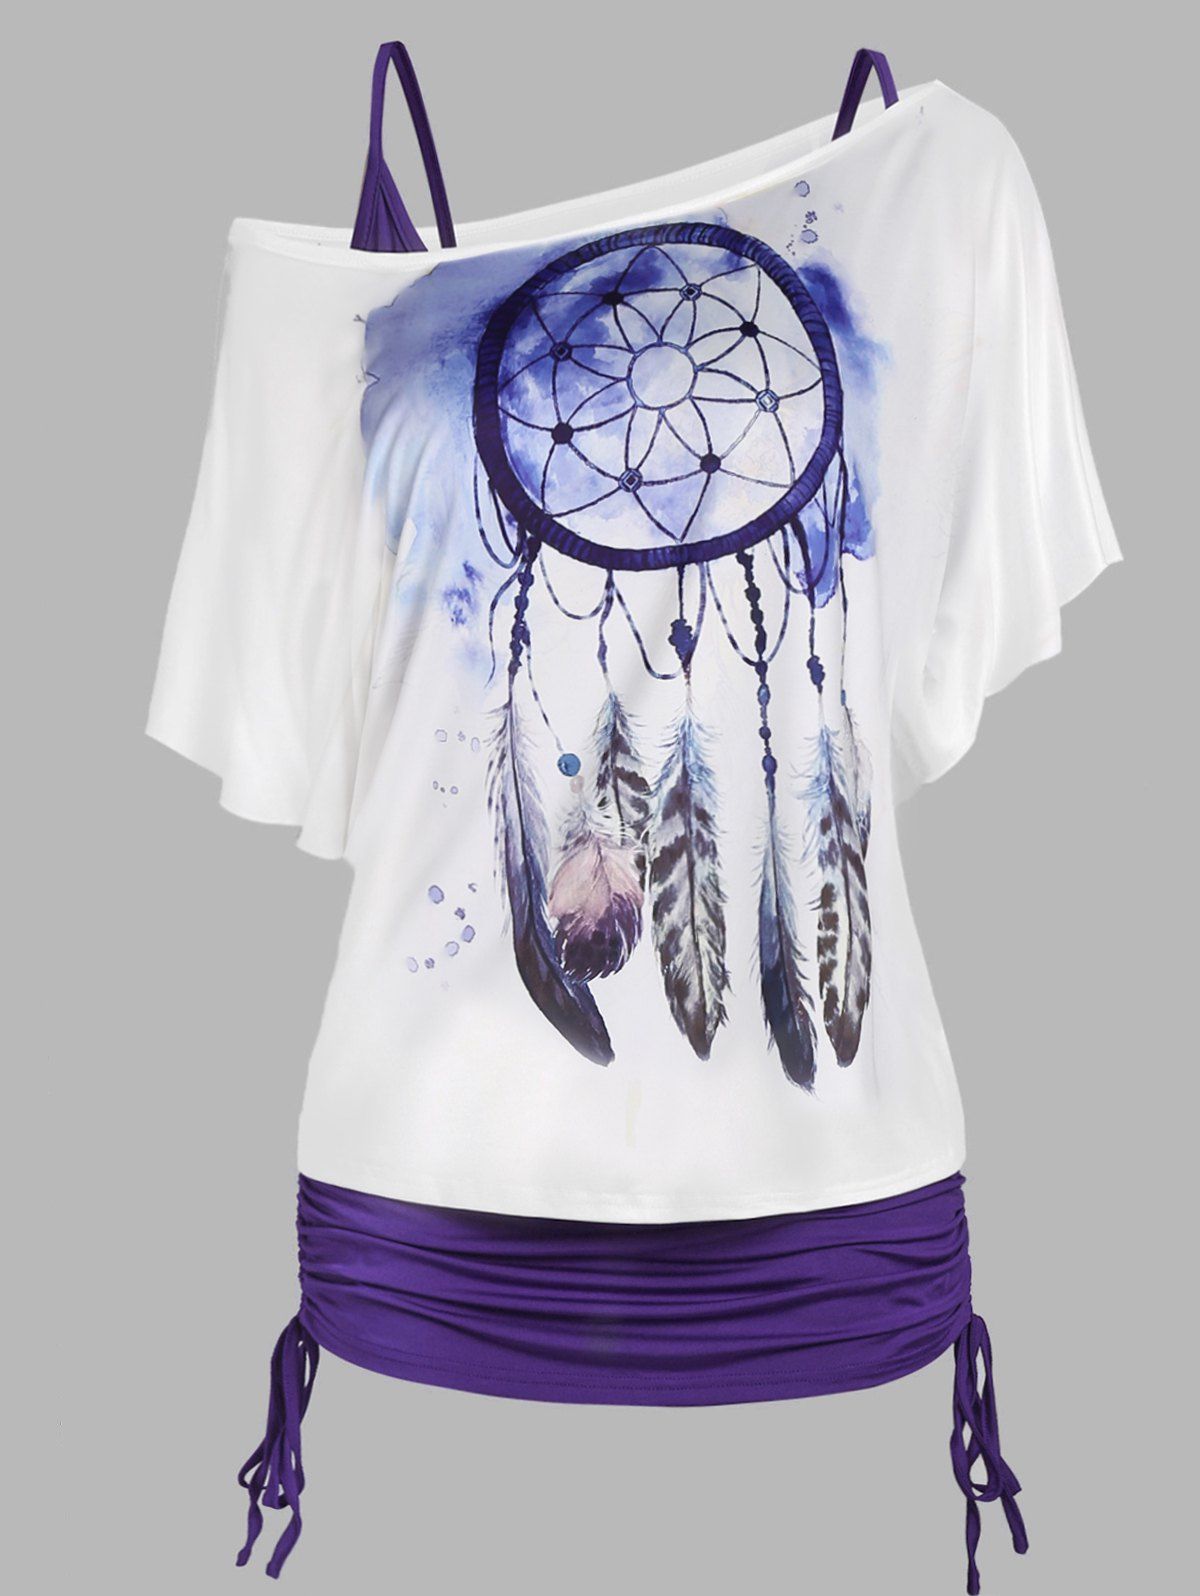 Vacation Feather Sunflower Print Dream Catcher T Shirt and Cinched Cami Top Two Piece Set - PURPLE XXL